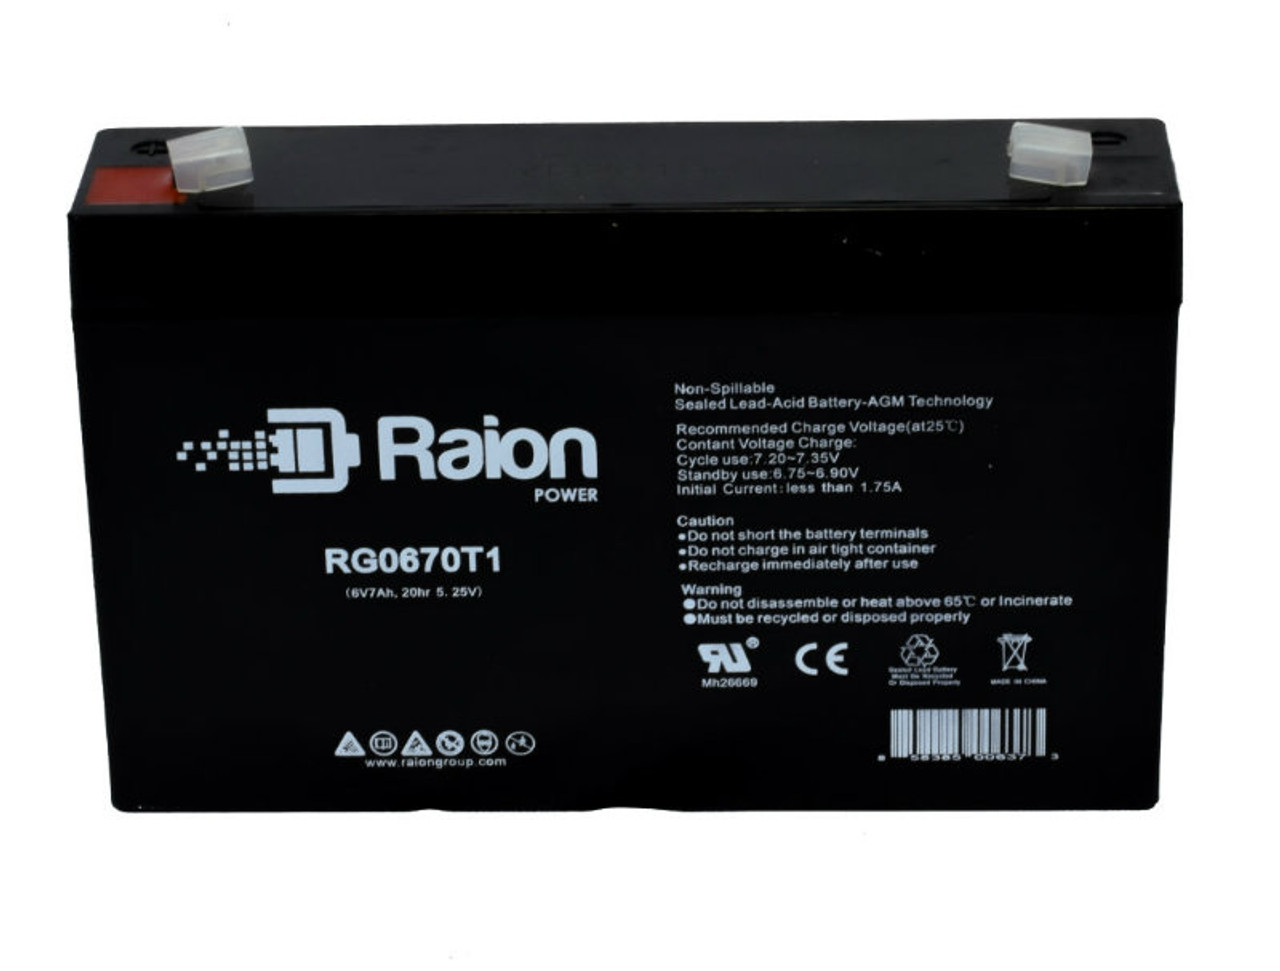 Raion Power RG0670T1 Replacement Battery Cartridge for TOBBI 6V Mercedes-Benz EQC Officially Licensed Ride-On Car